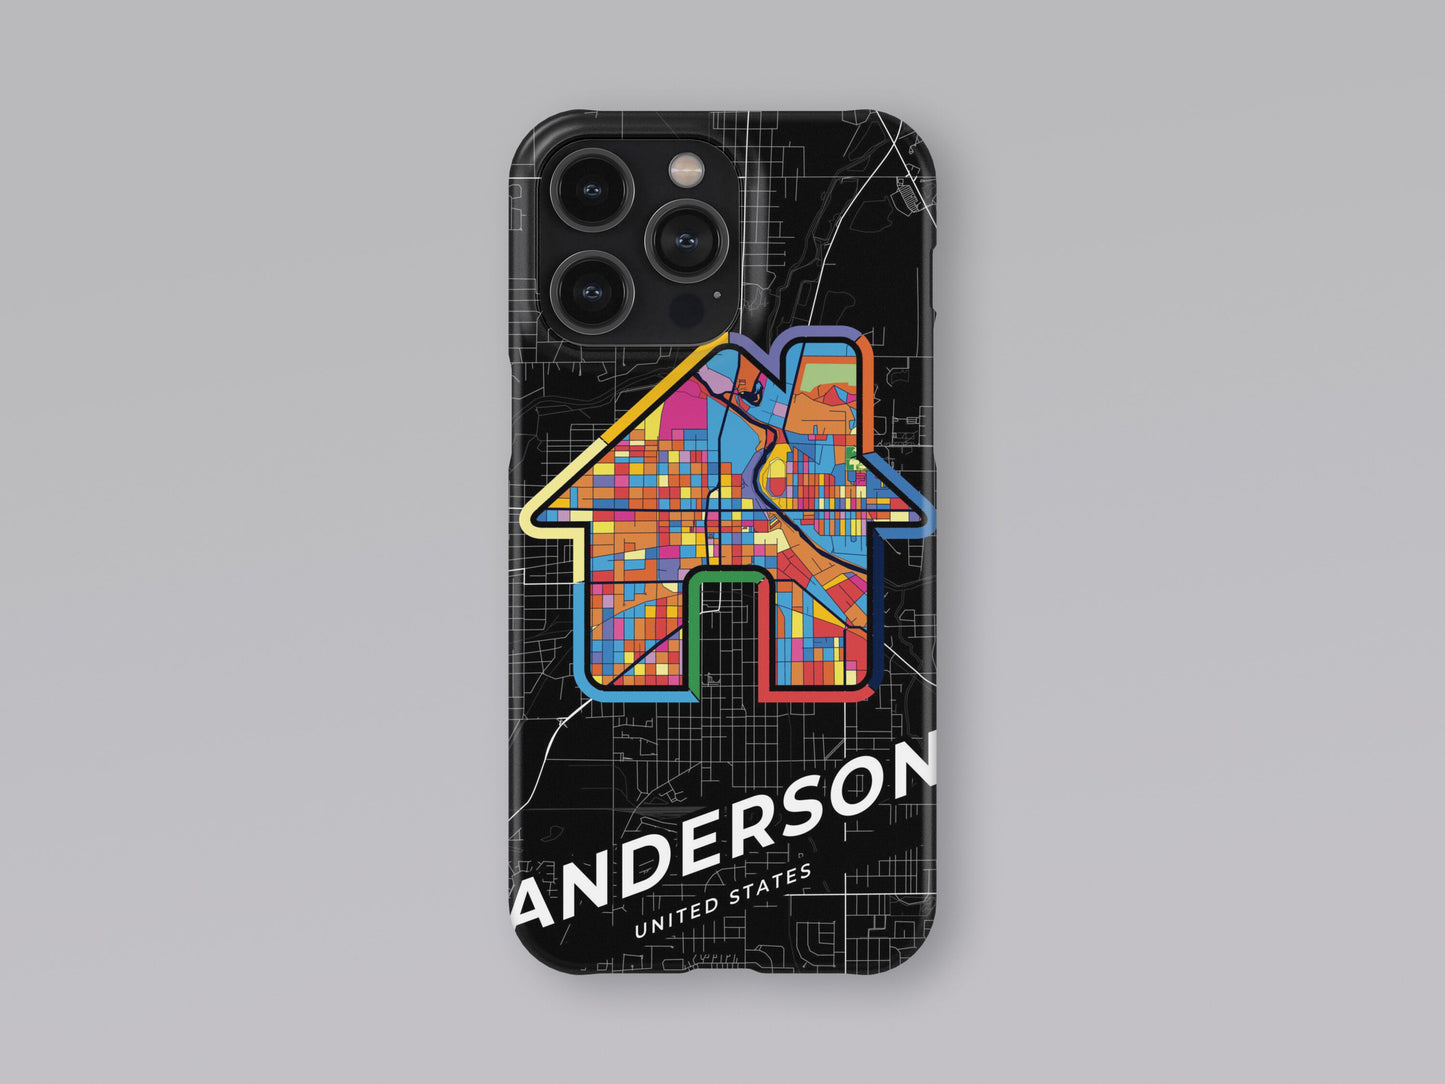 Anderson Indiana slim phone case with colorful icon. Birthday, wedding or housewarming gift. Couple match cases. 3